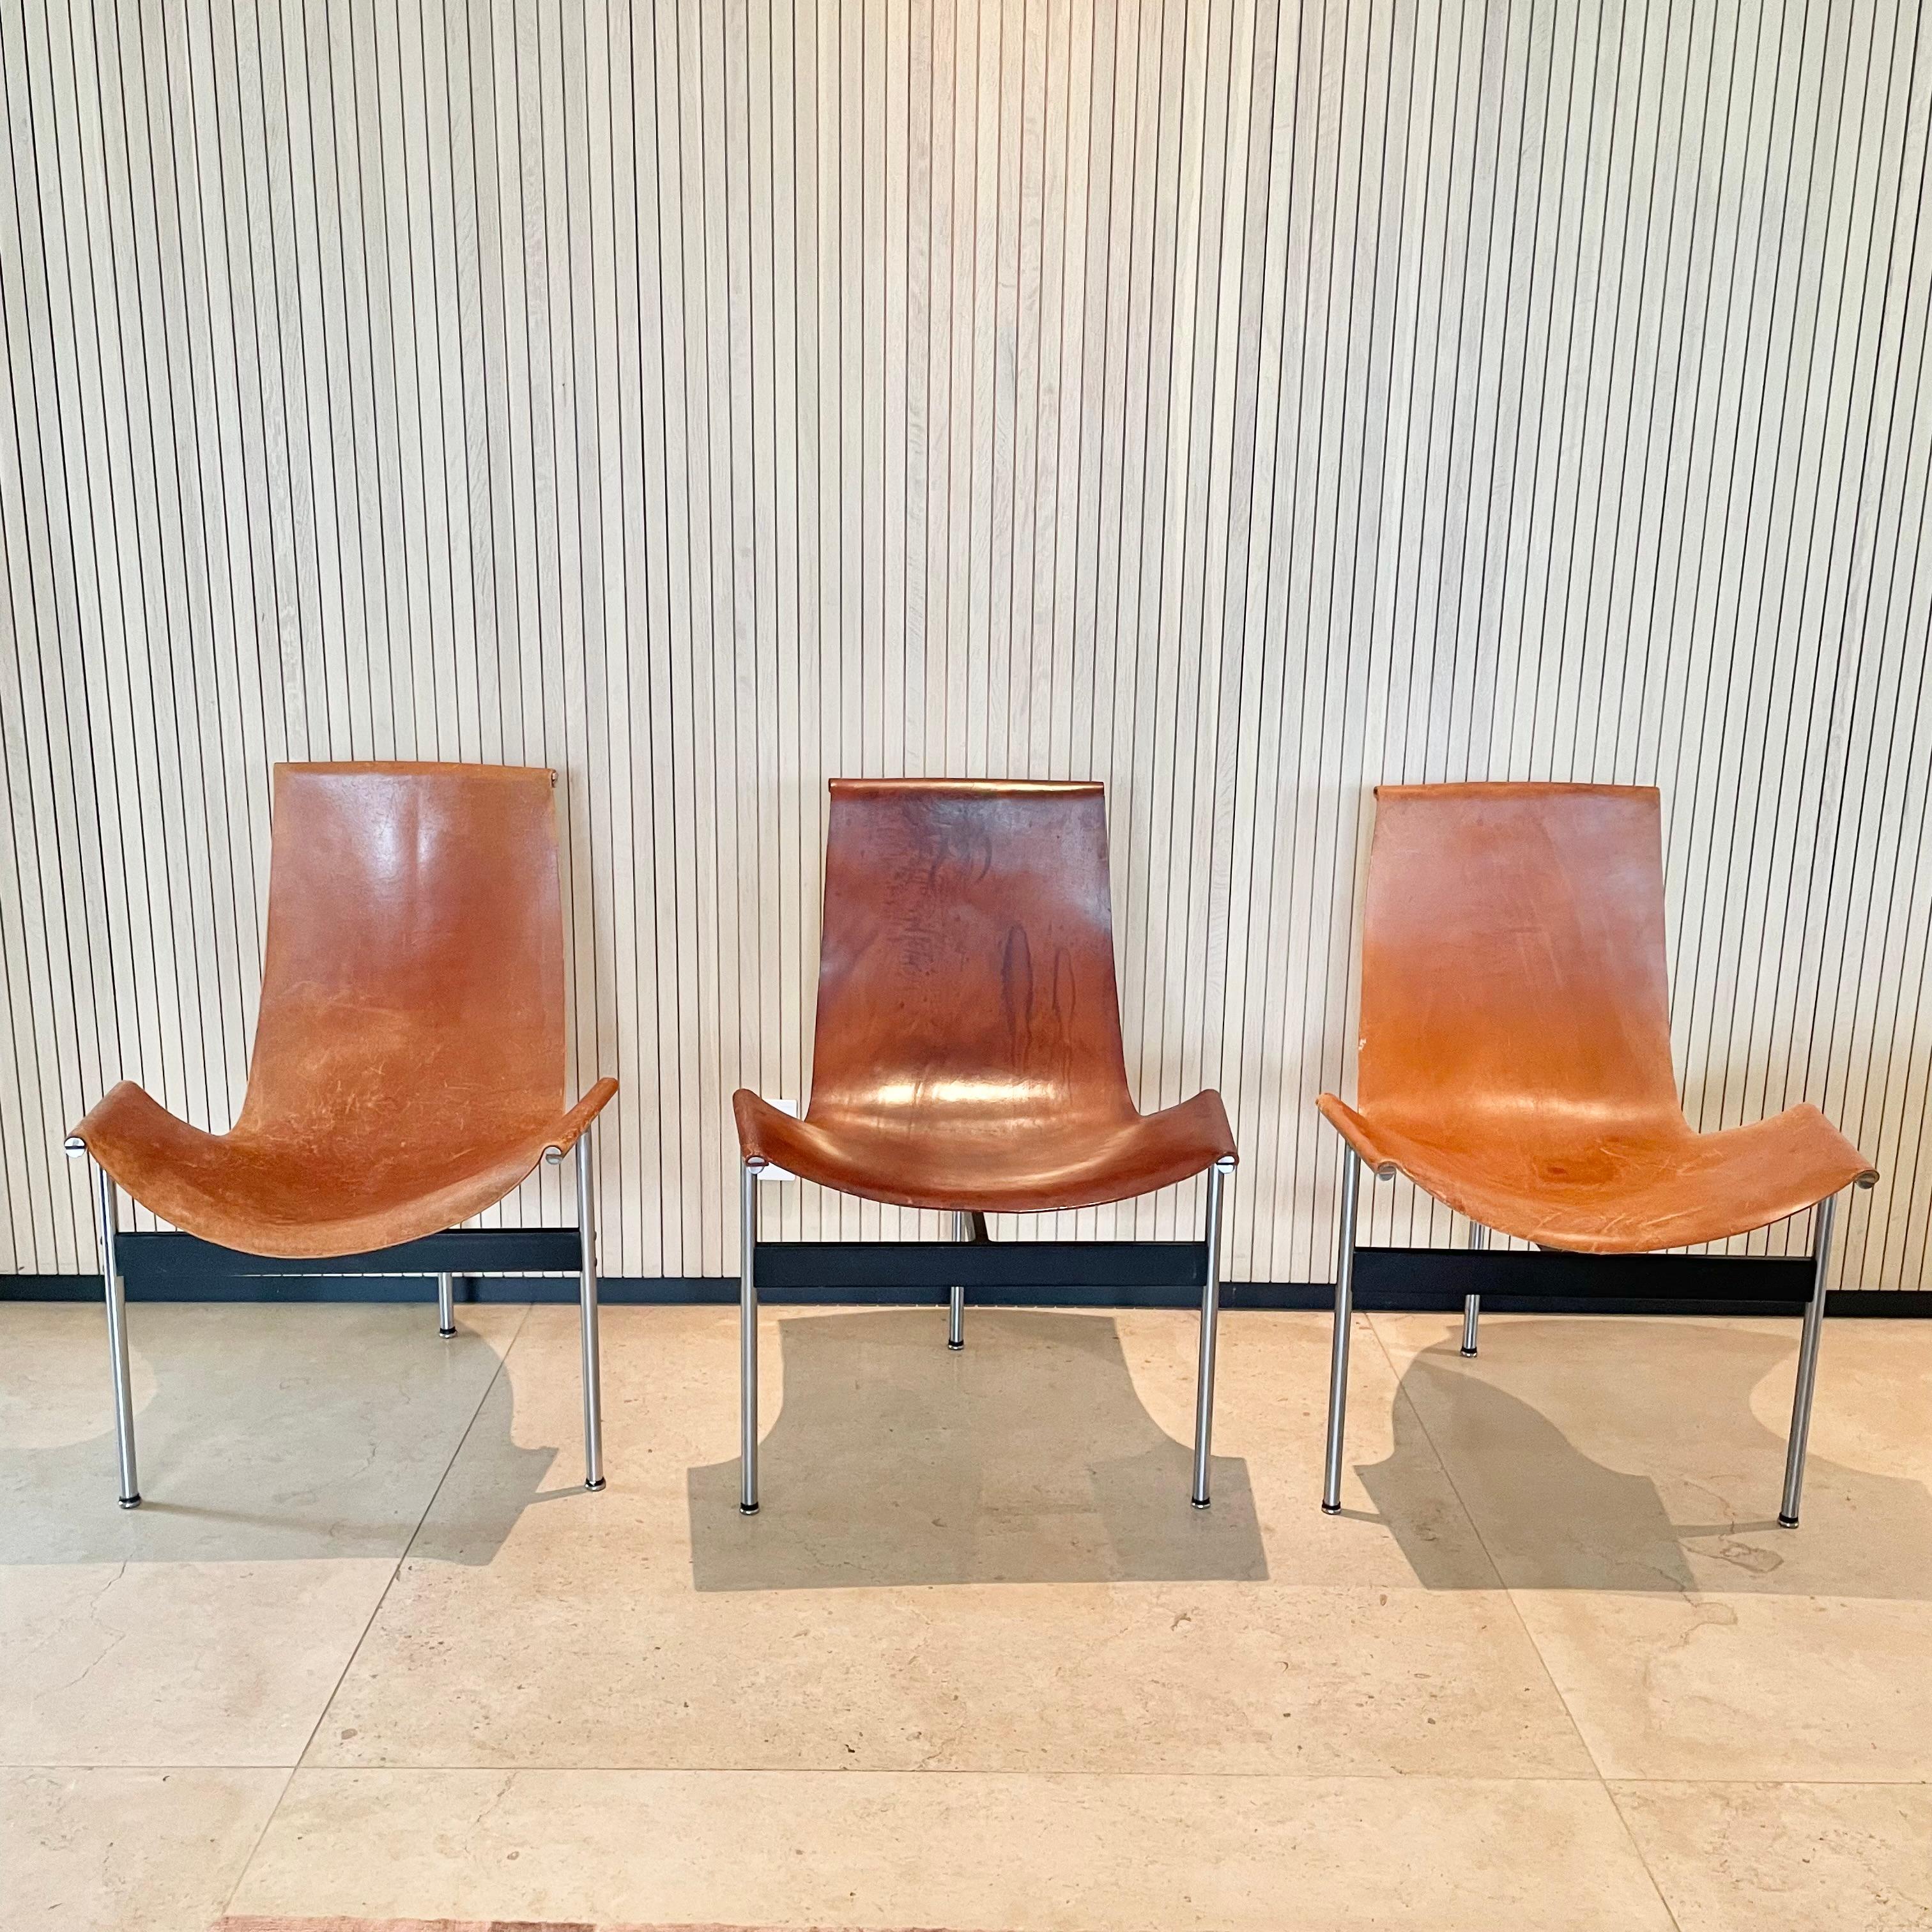 T chairs by Katavolos in original tan cowhide. Floating leather sling seat attached to the metal frame at 3 points by T bars. Great condition to chrome and leather. Priced individually.